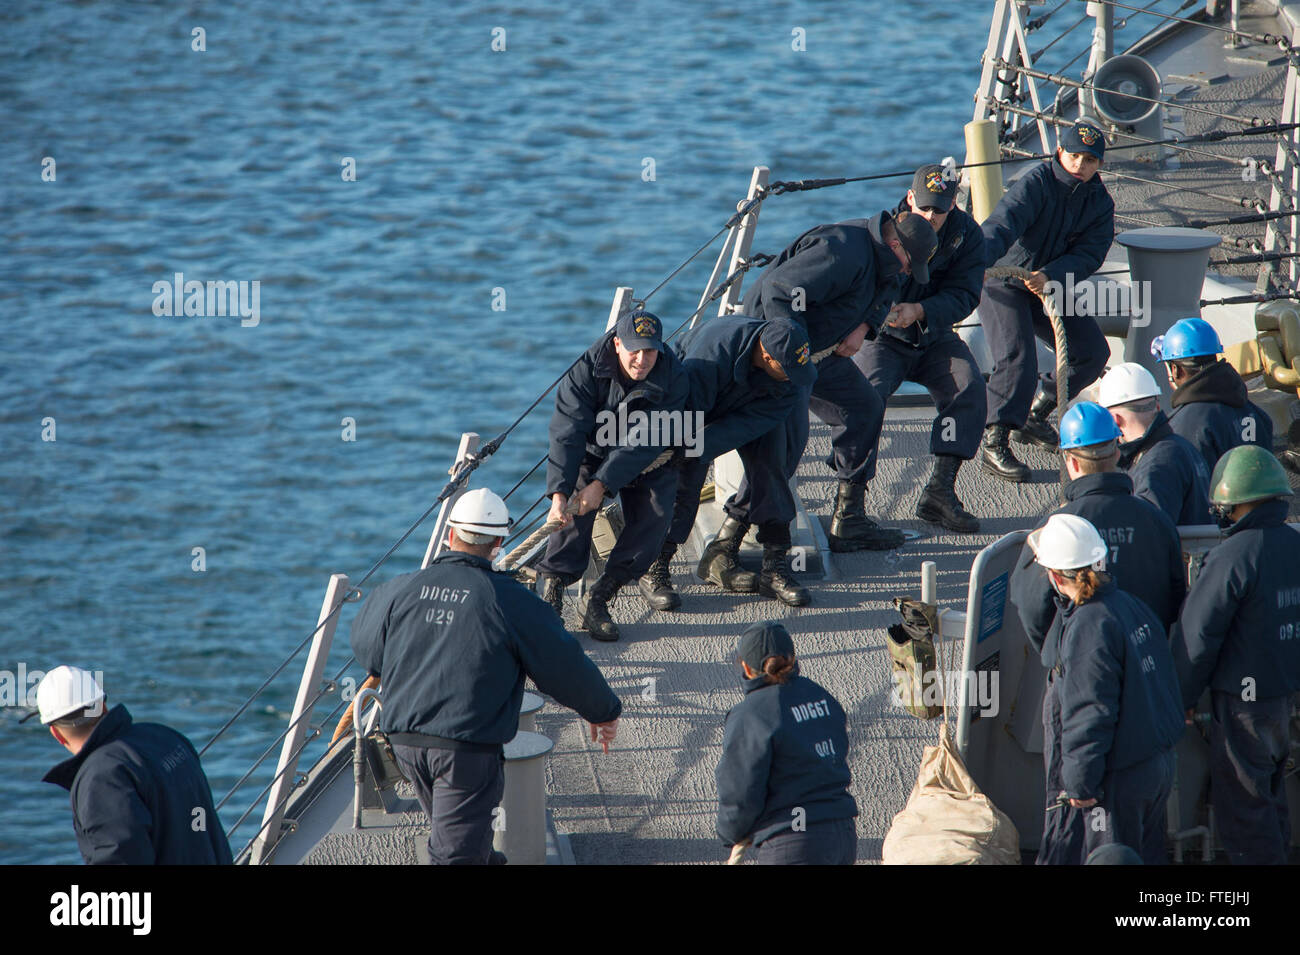 AUGUSTA BAY (Dec. 8, 2014) Sailors aboard USS Cole (DDG 67) heave in mooring lines as the ship pulls in to Augusta Bay, Sicily, during a scheduled port visit Dec. 8, 2014. Cole, an Arleigh Burke-class guided-missile destroyer, homeported in Norfolk, is conducting naval operations in the U.S. 6th Fleet area of operations in support of U.S. national security interests in Europe. Stock Photo